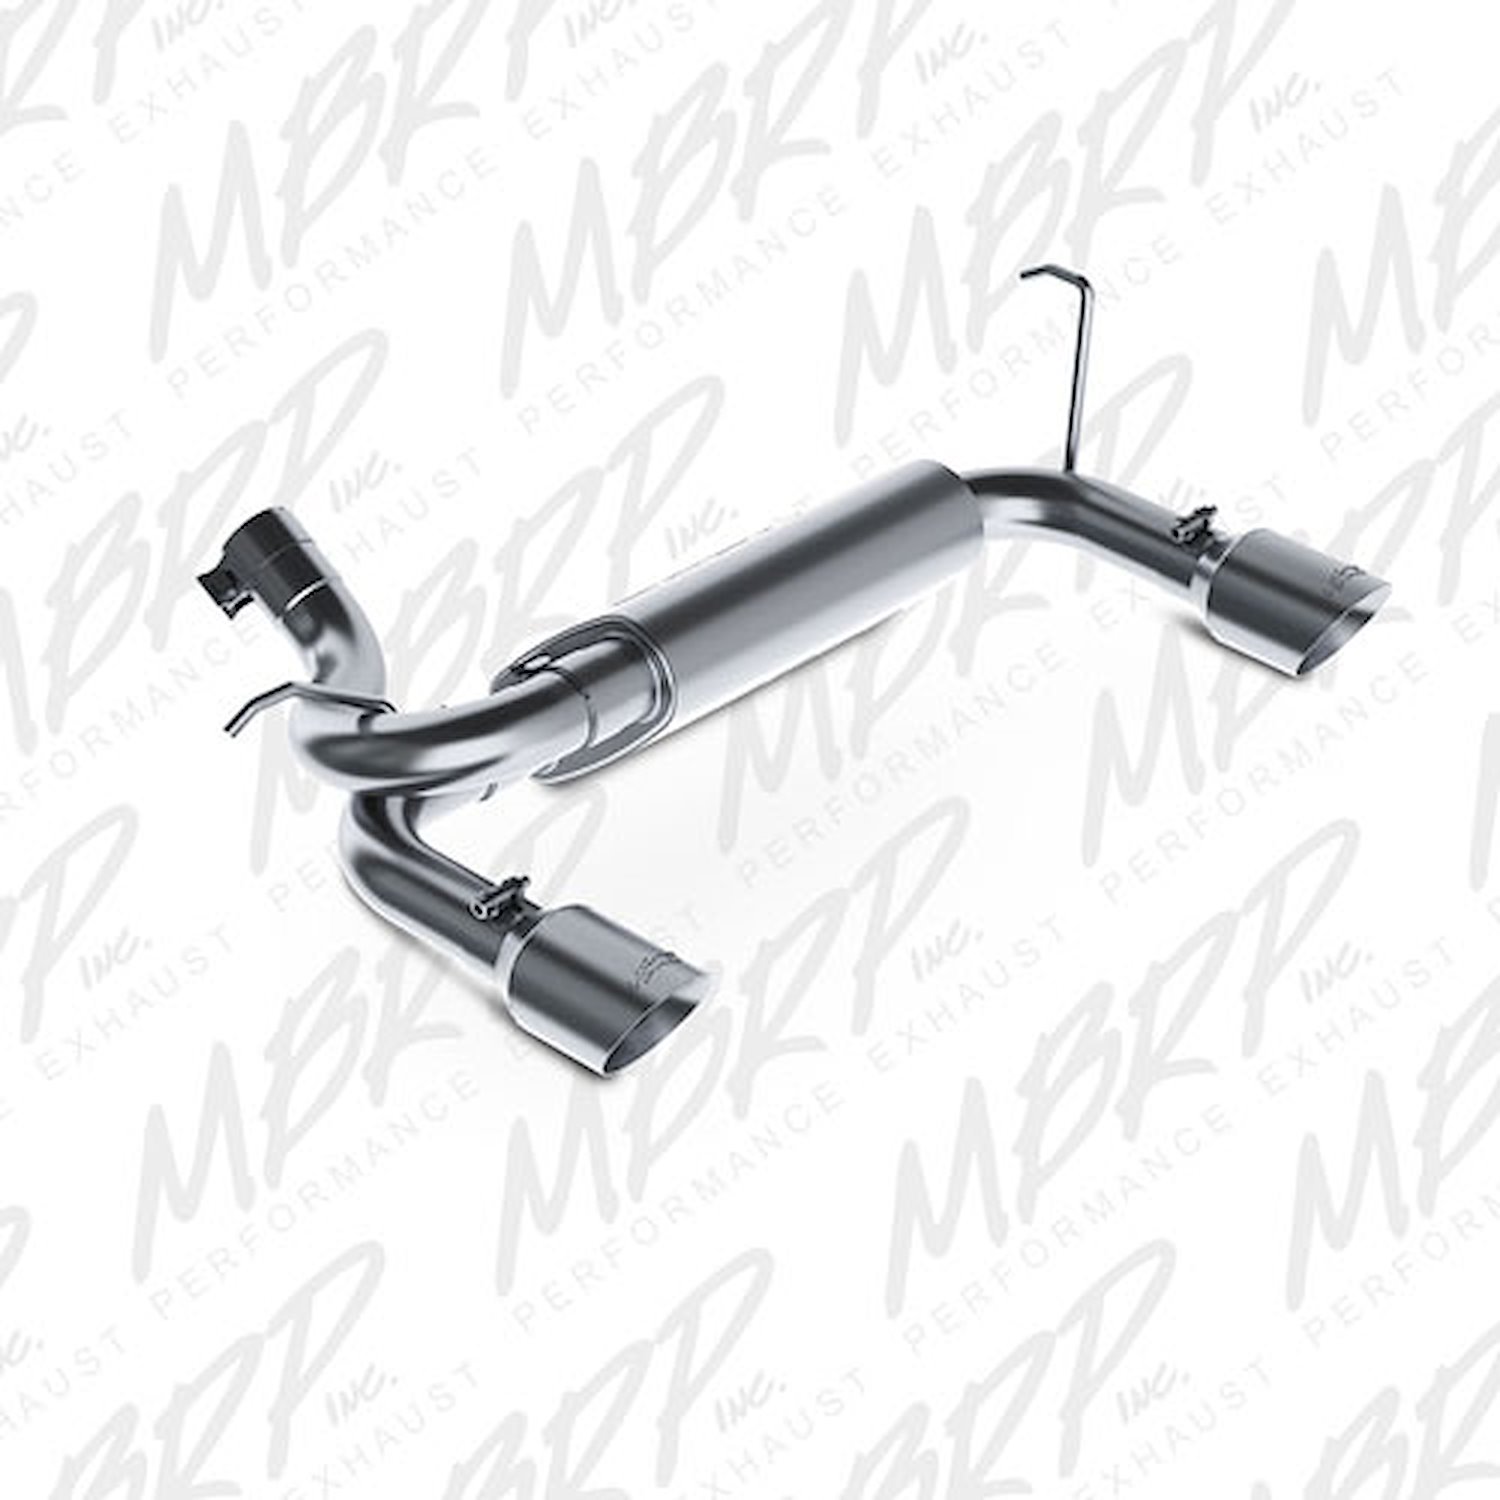 Installer Series Exhaust System 2007-2016 Jeep Wrangler/Rubicon 3.6L/3.8L